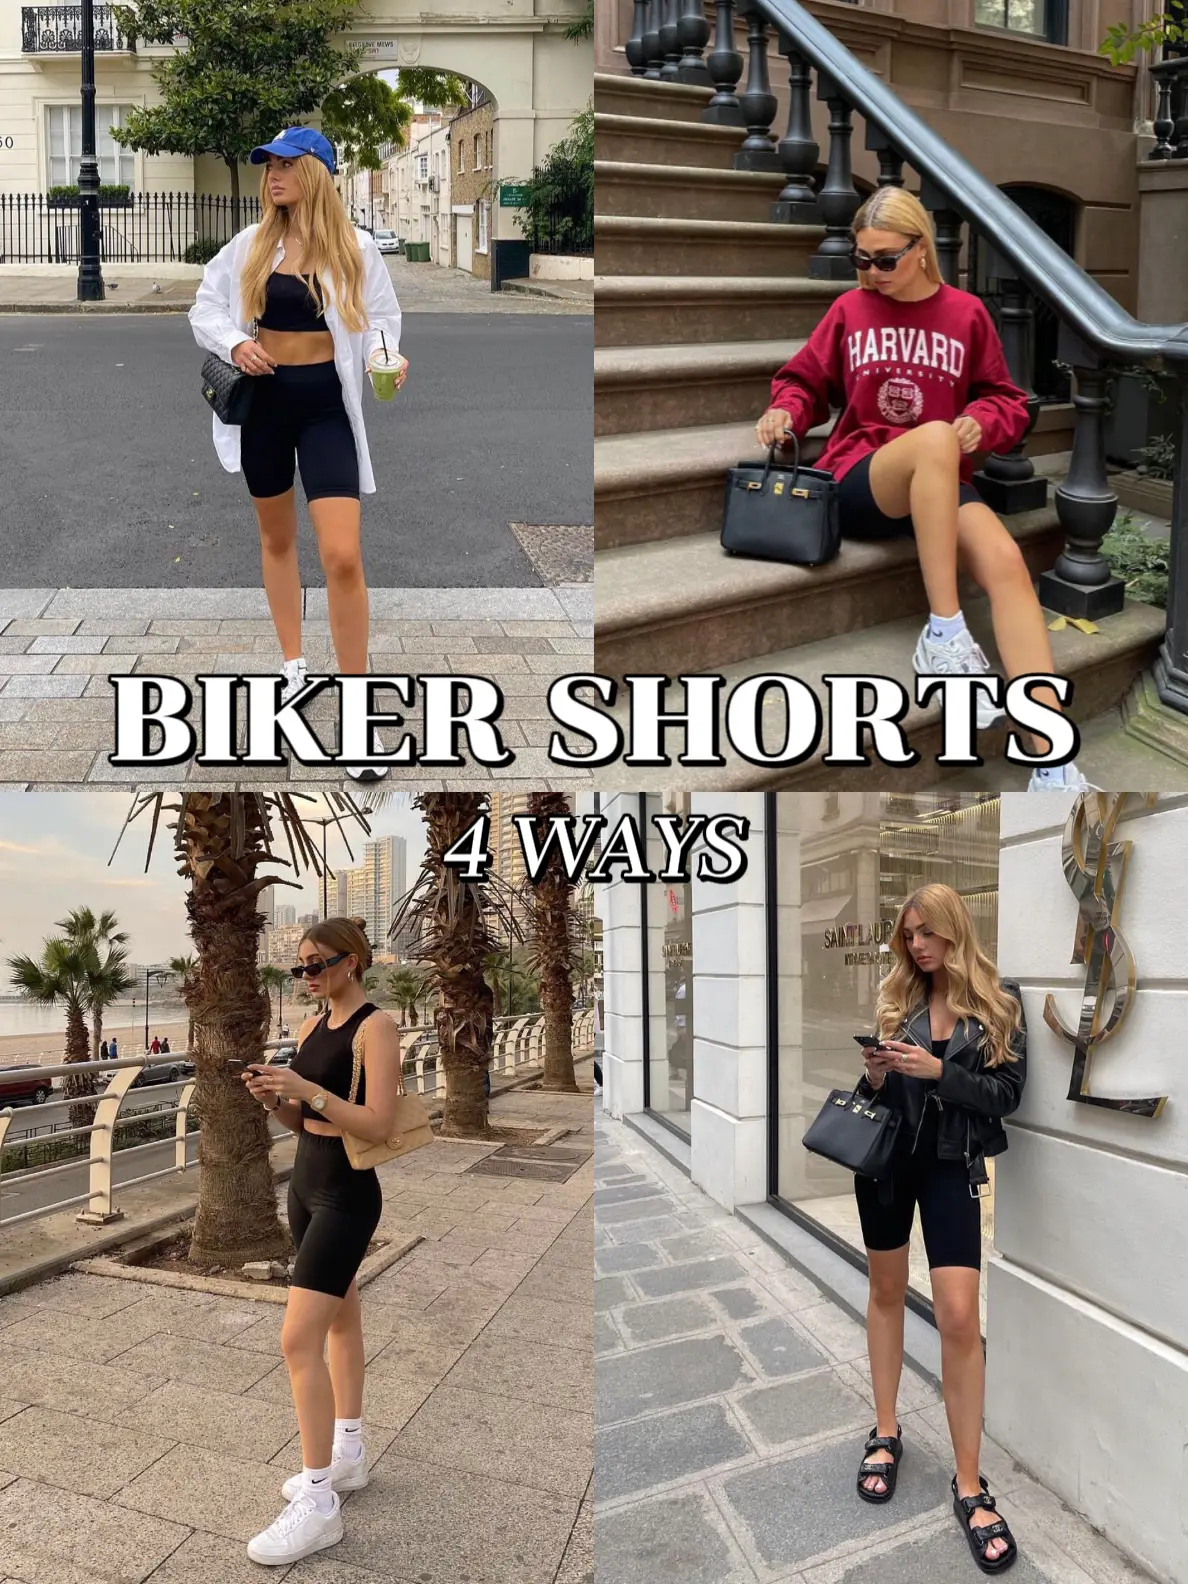 BIKER SHORTS - 4 WAYS, Gallery posted by loulouduvillier